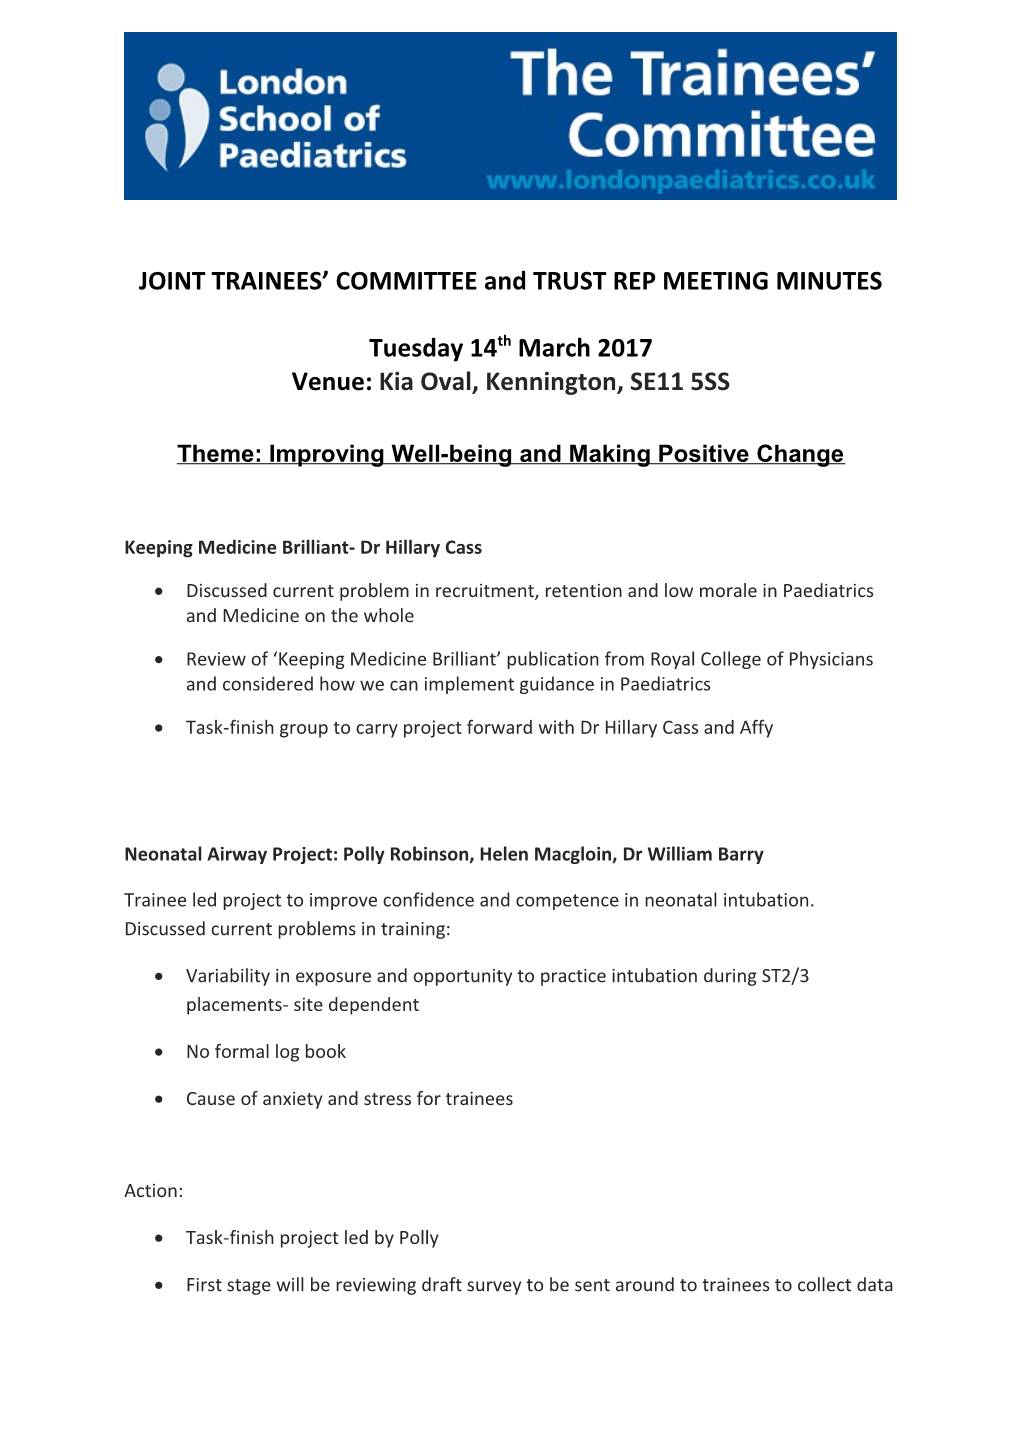 JOINT TRAINEES COMMITTEE and TRUST REP MEETING MINUTES